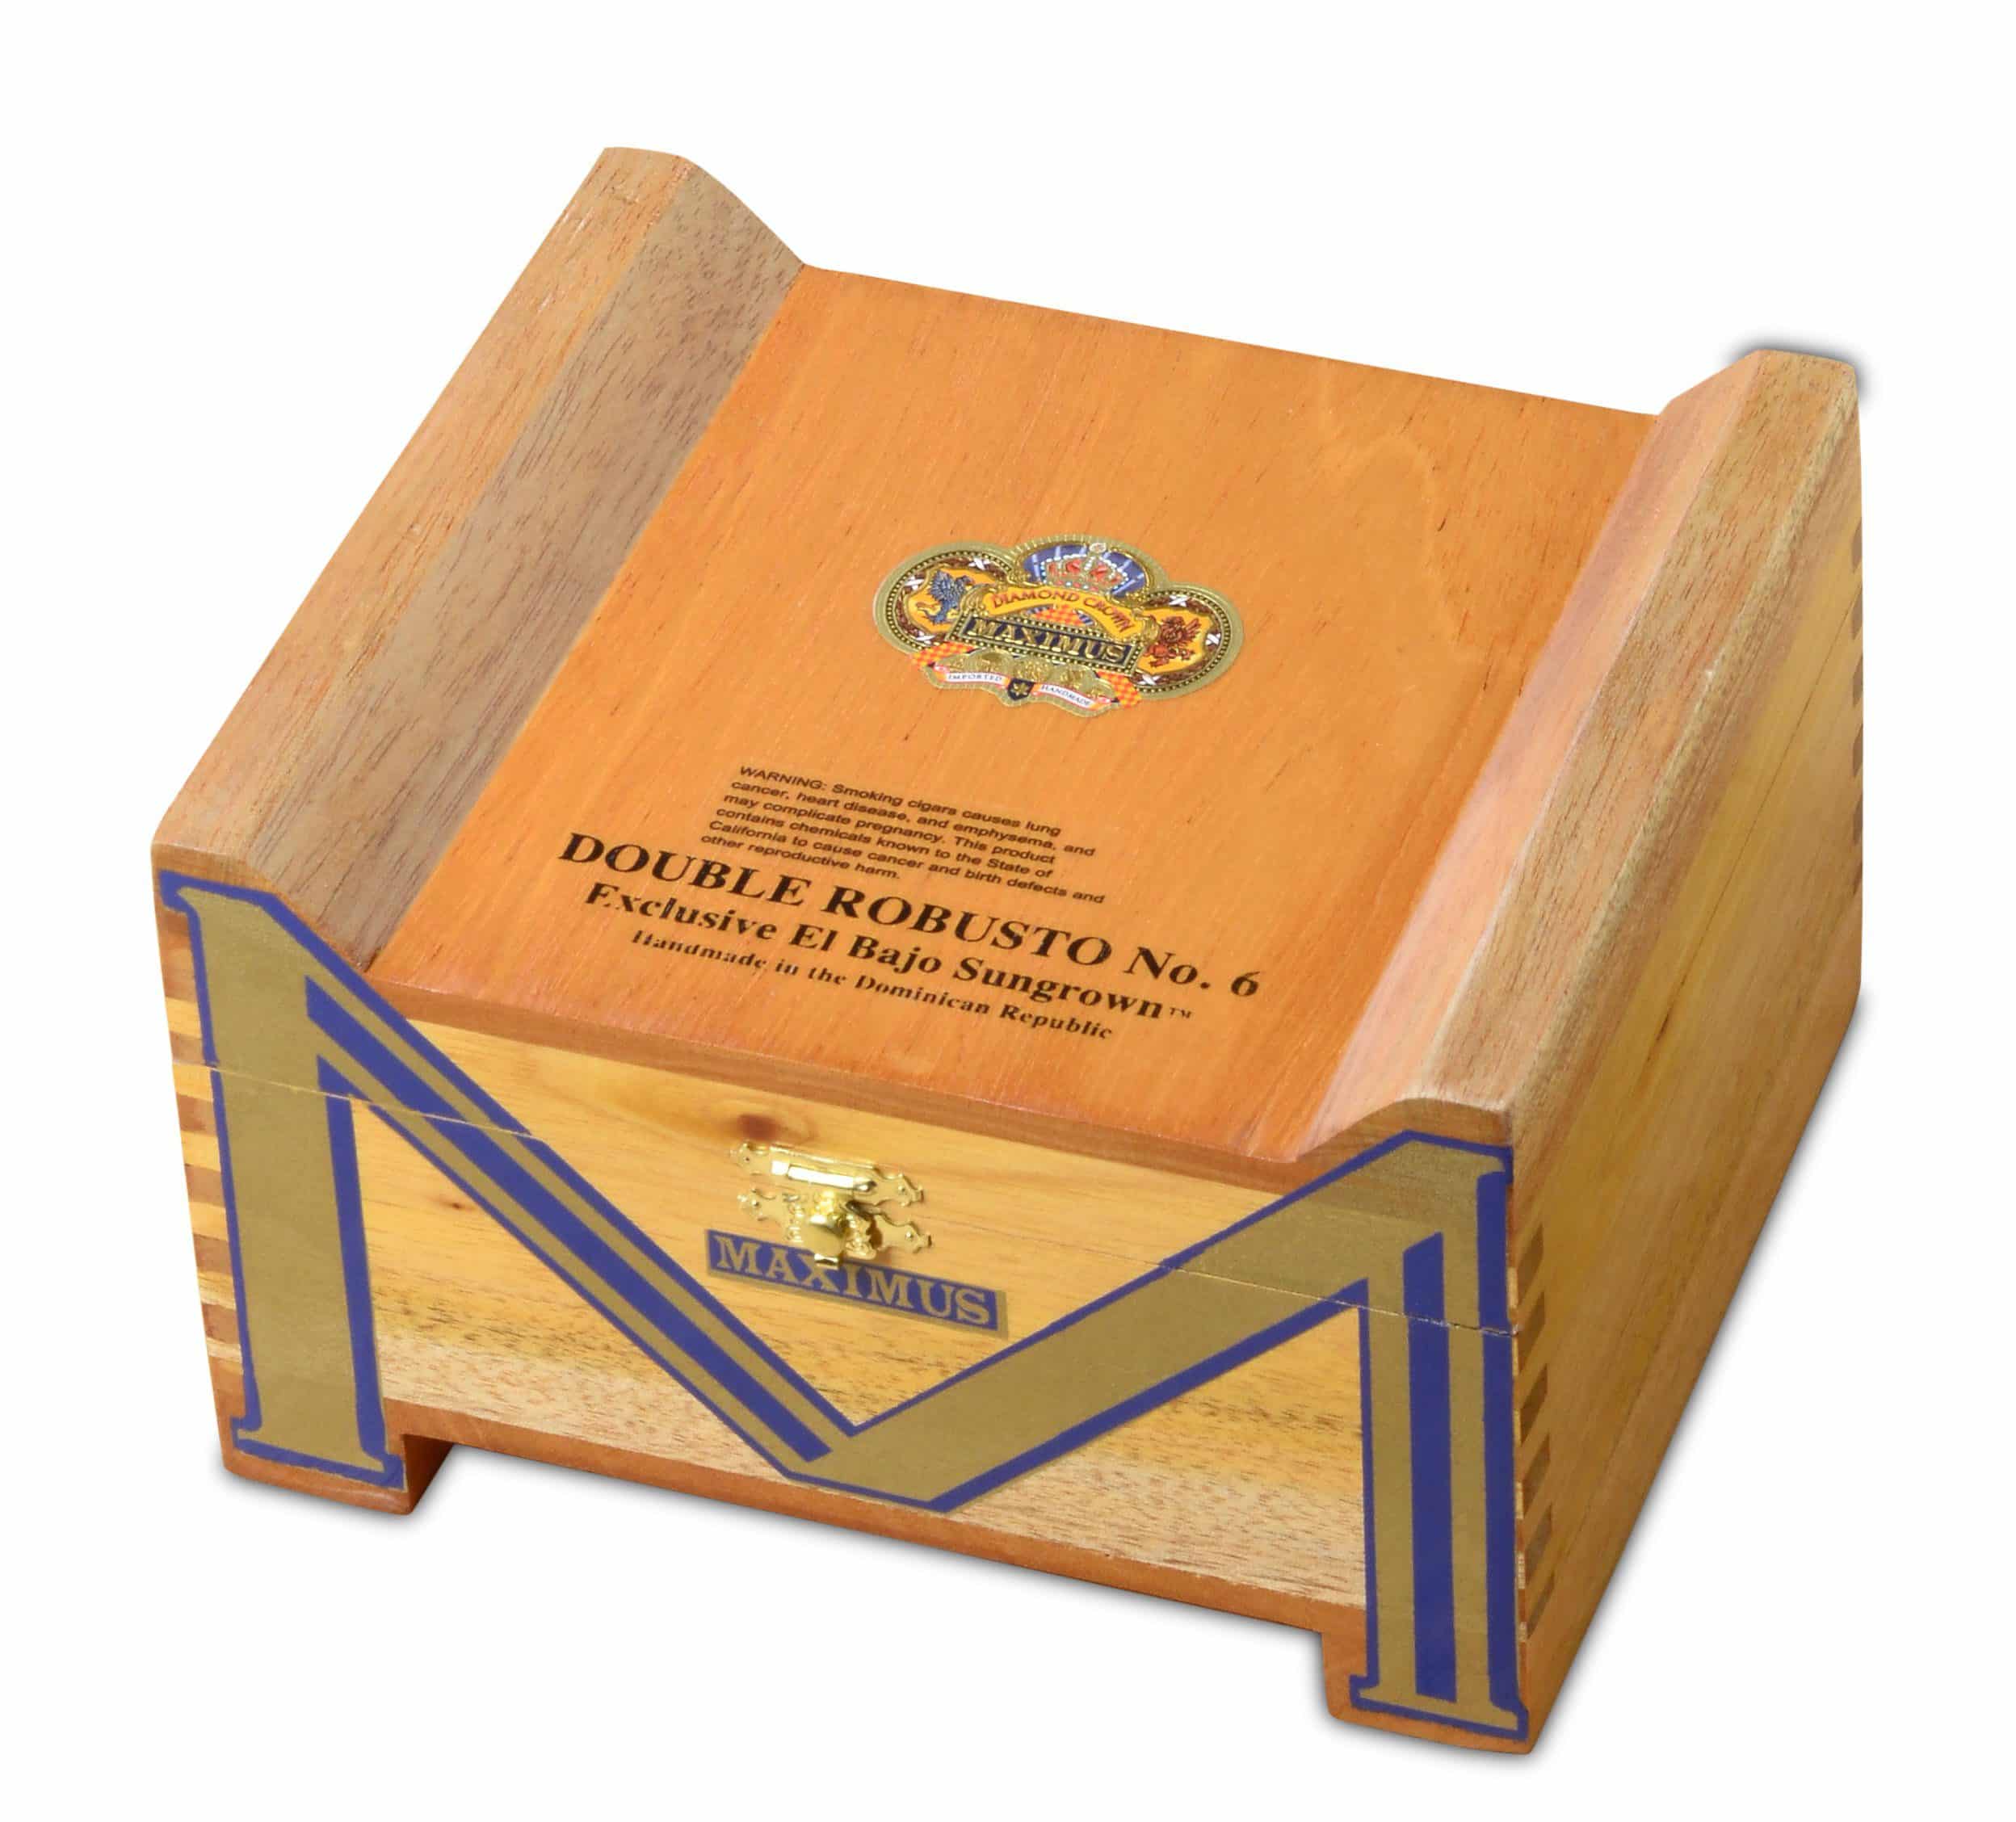 diamond crown maximus double robusto number 6 box closed